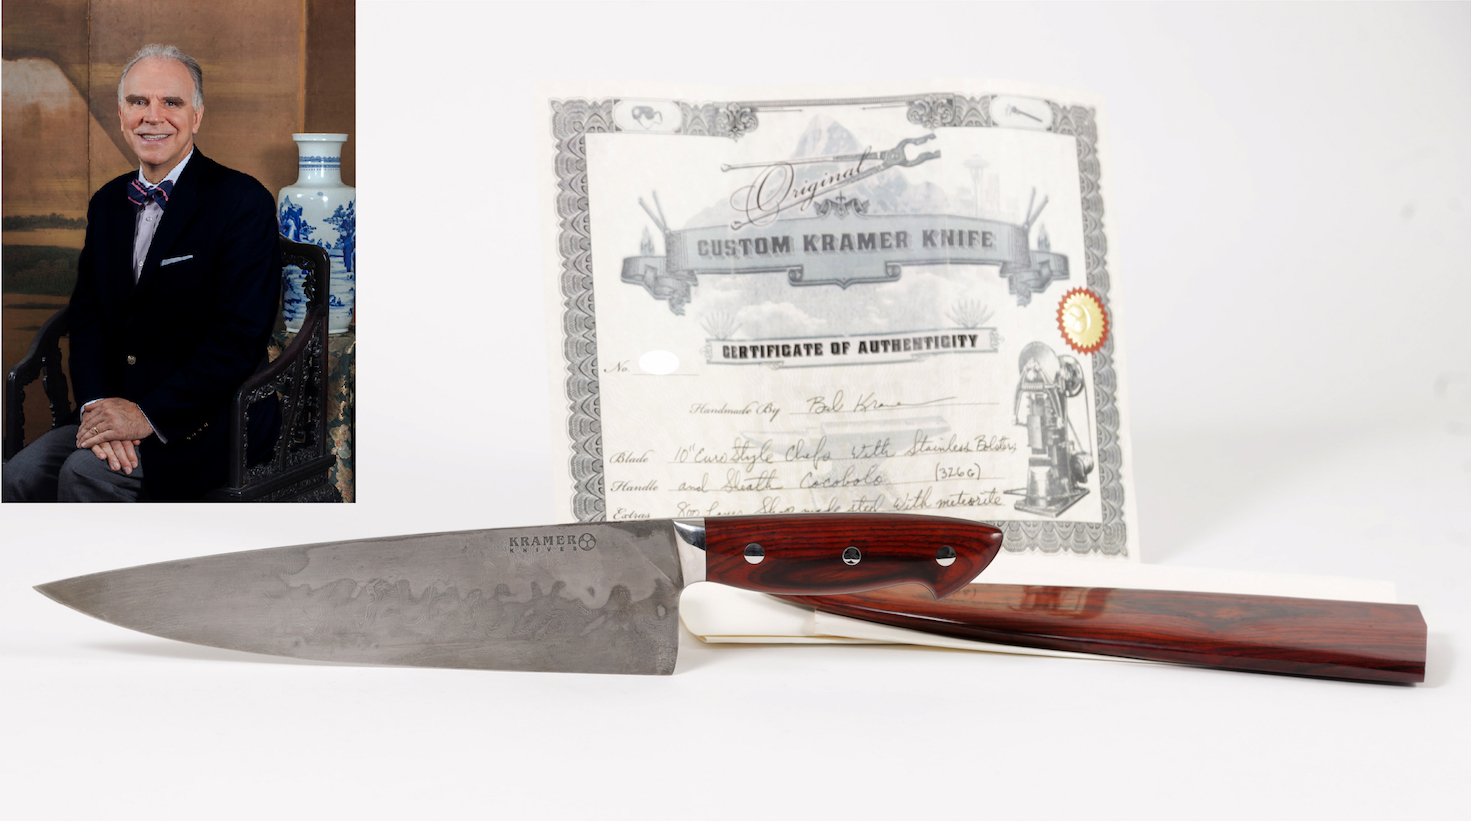 A photo of Anthony Bourdain's meteroite knife and its certificate of authenticity with an inset of Lark Mason sitting in an antique chair with an Asian vase behind him and other antique items in the background.